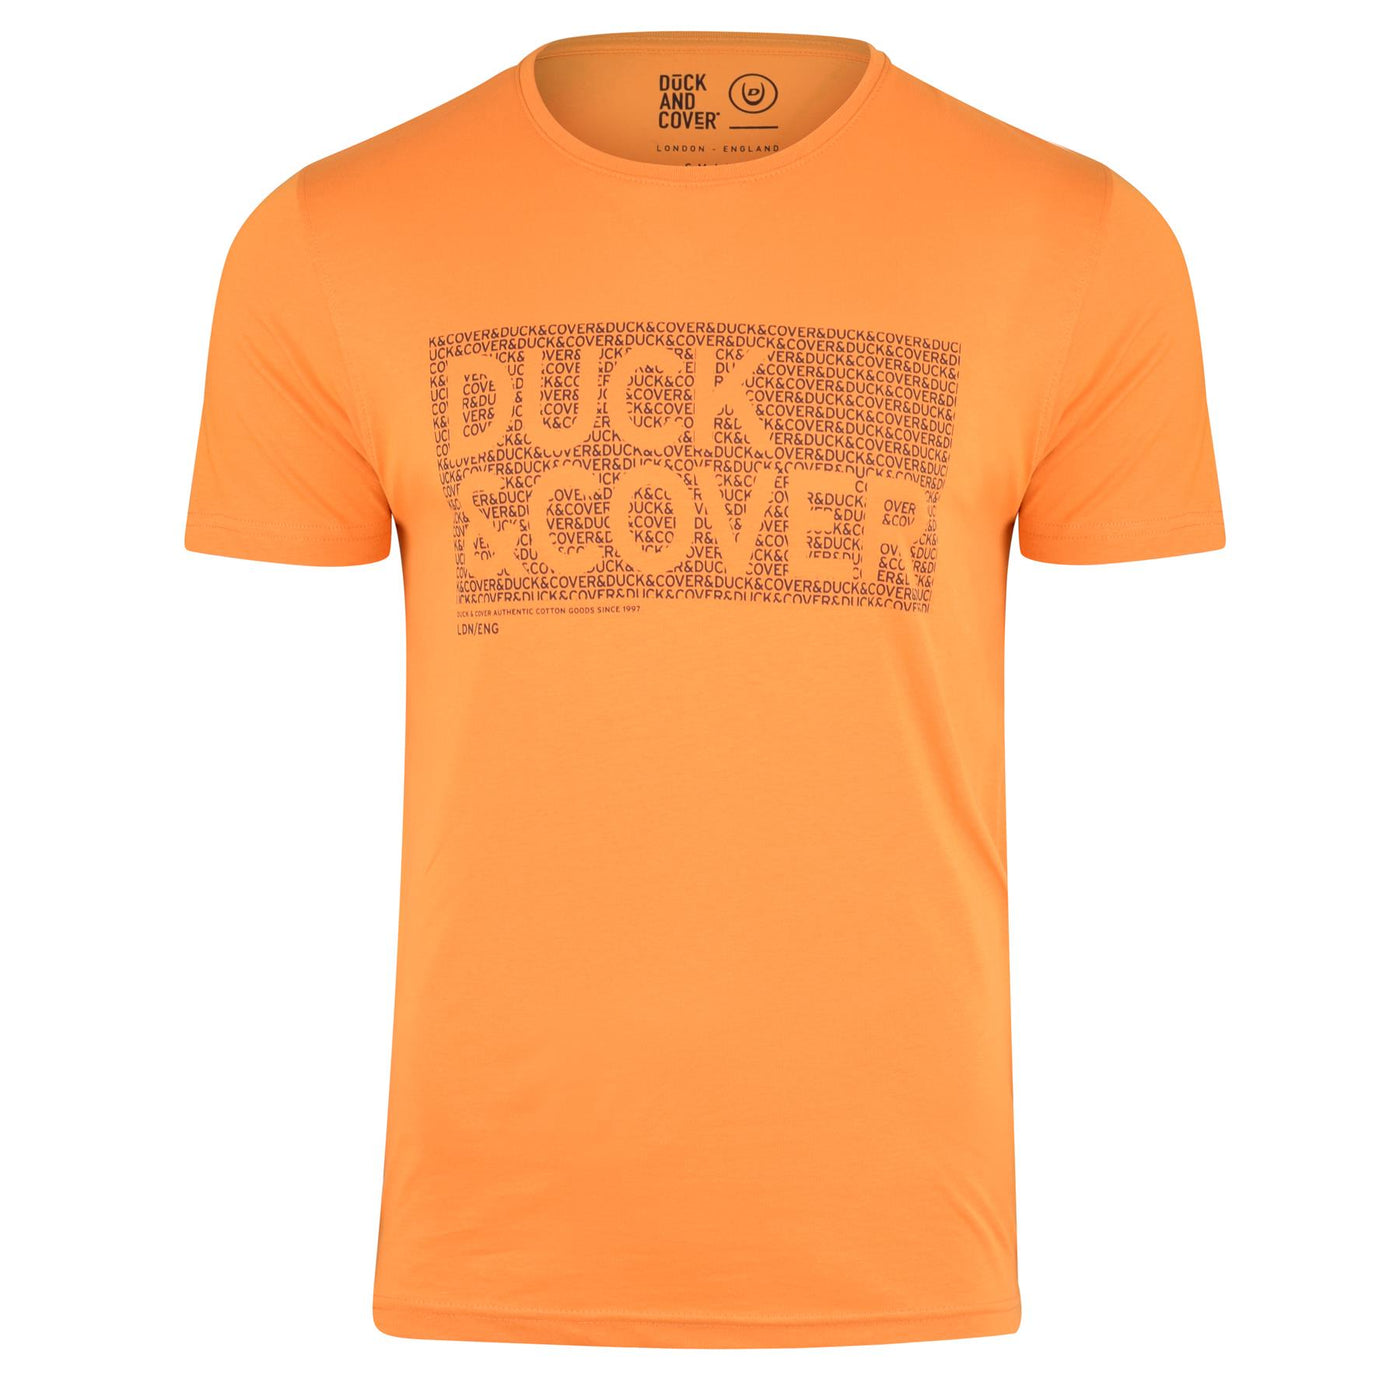 Duck and Cover 5 Pack Mens Designer T Shirts Multipack Cotton Tees Holiday Tops